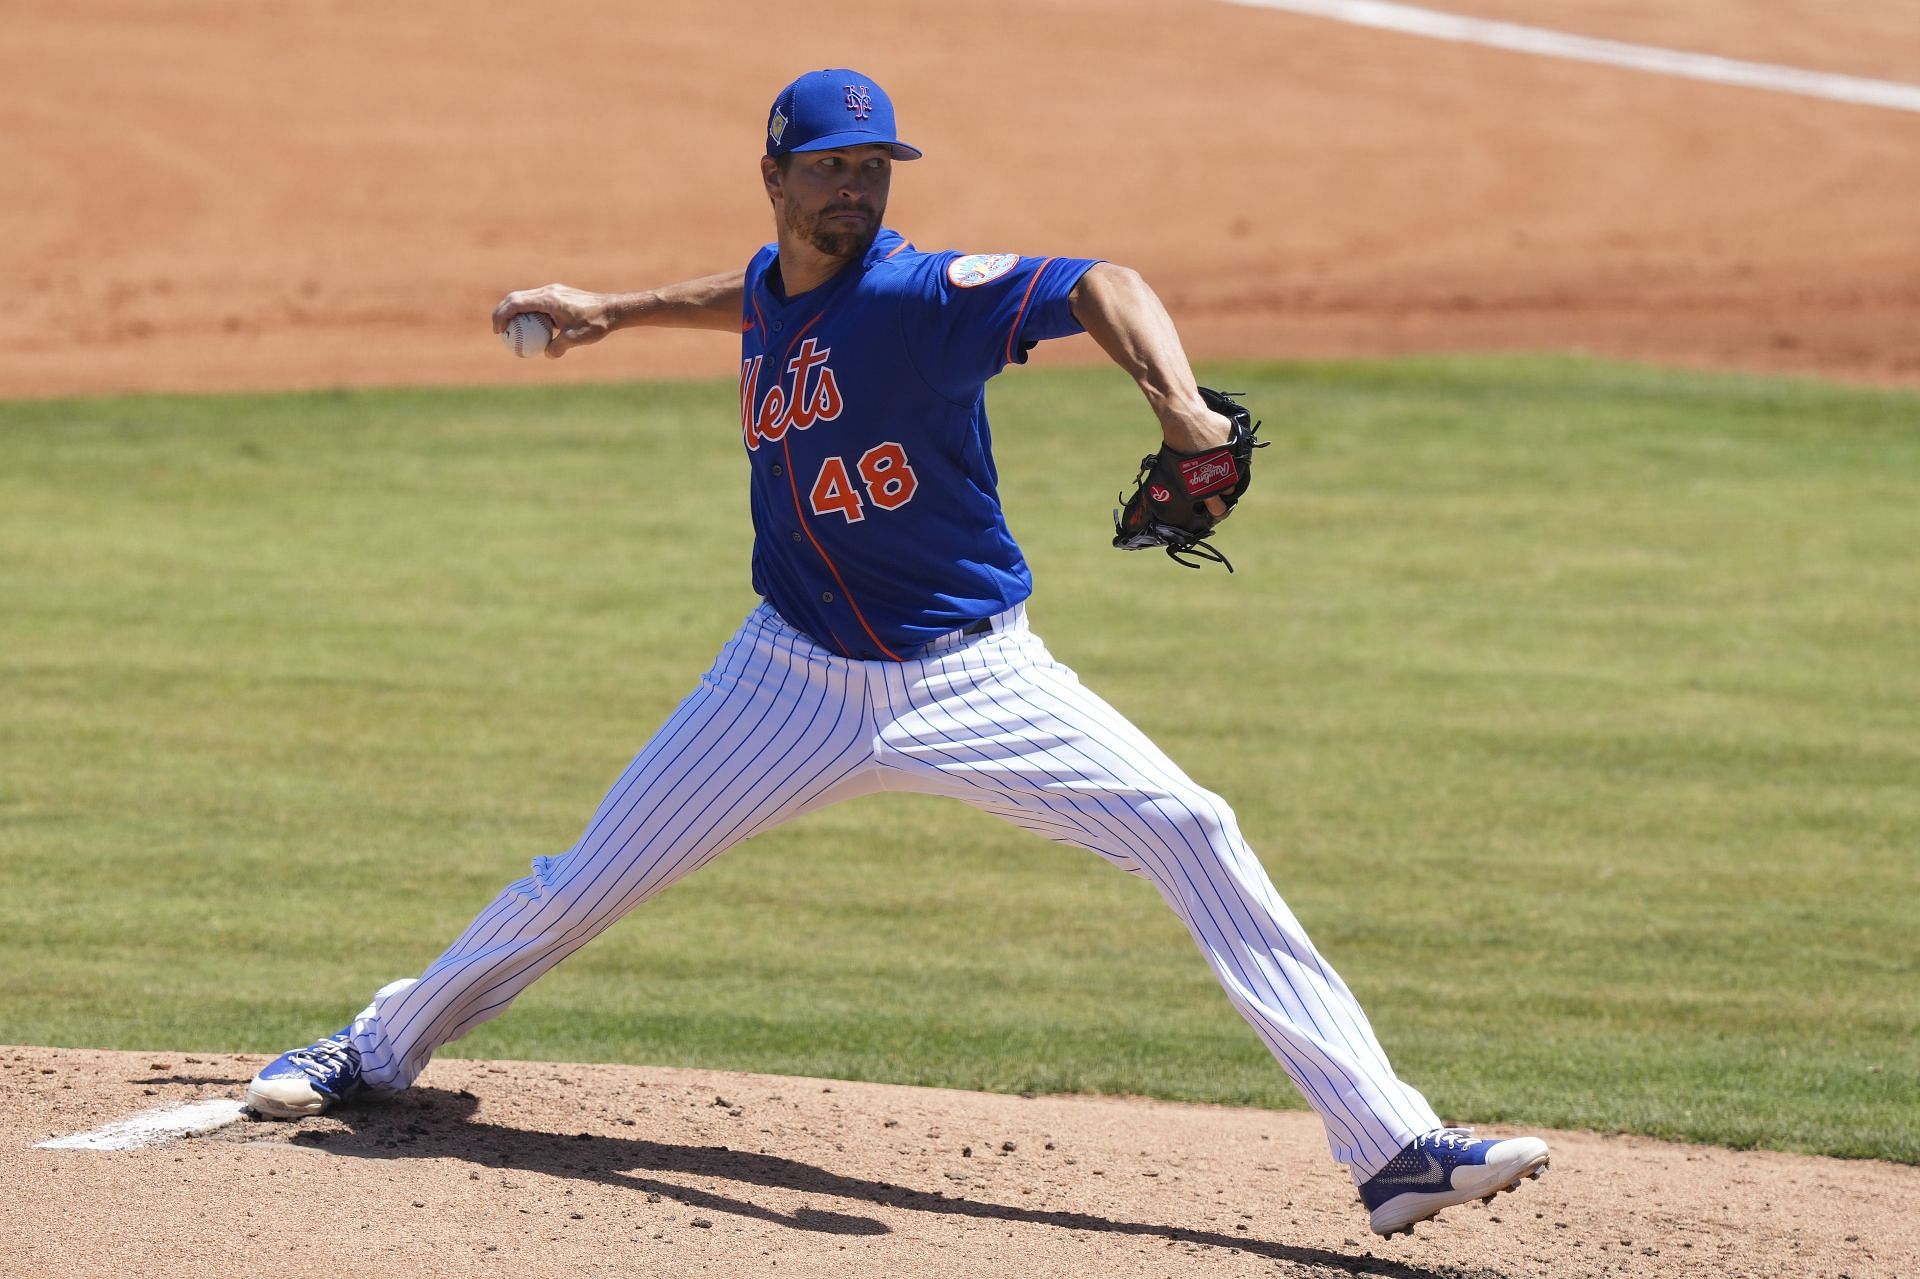 Jacob deGrom of the New York Mets throws a pitch during the second inning of a Spring Training game